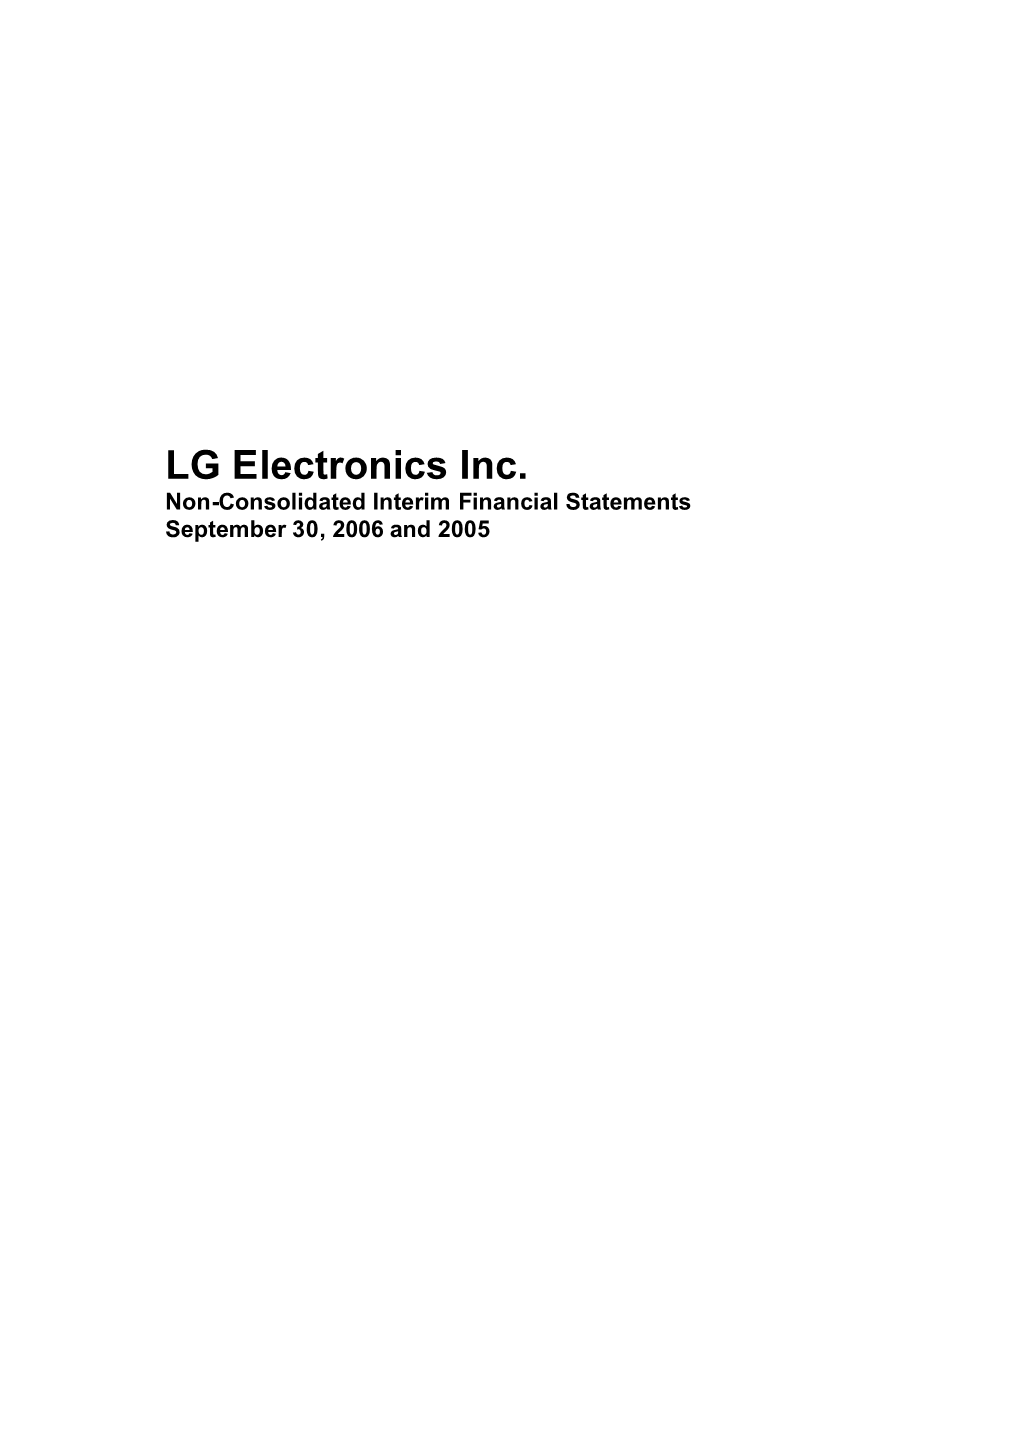 LG Electronics Inc. Non-Consolidated Interim Financial Statements September 30, 2006 and 2005 LG Electronics Inc